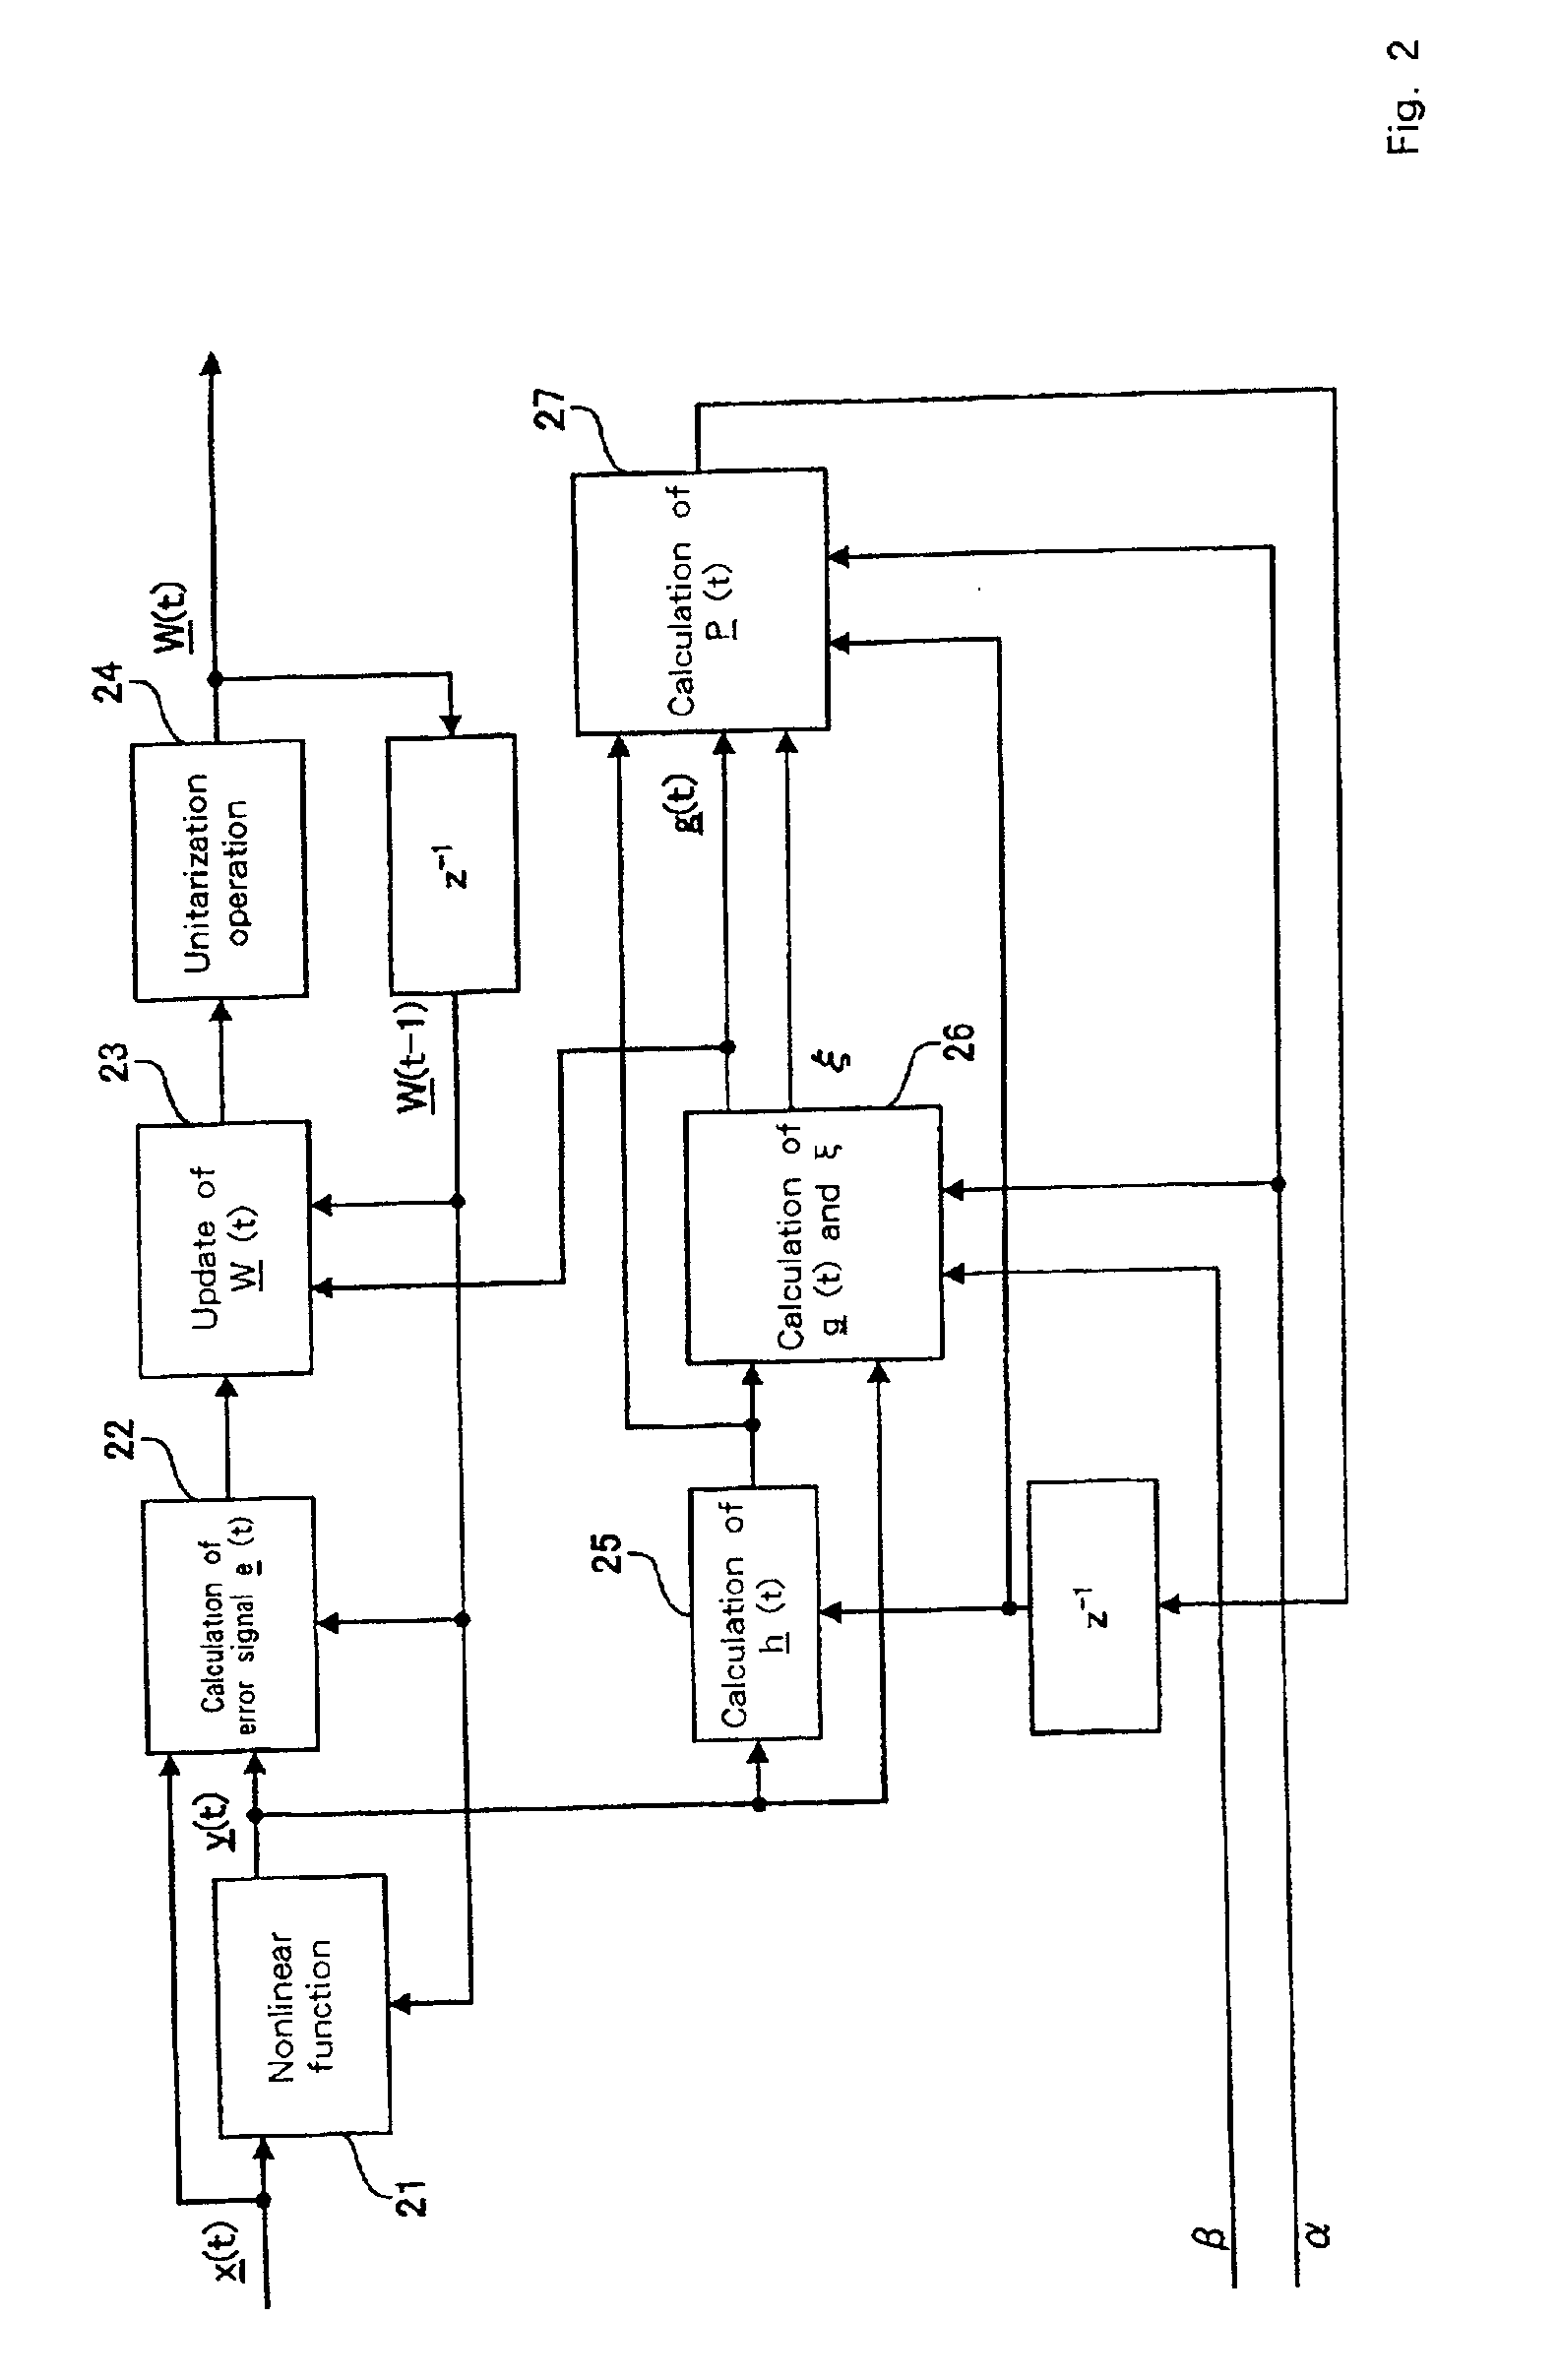 Signal separation method and apparatus for restoring original signal from observed data